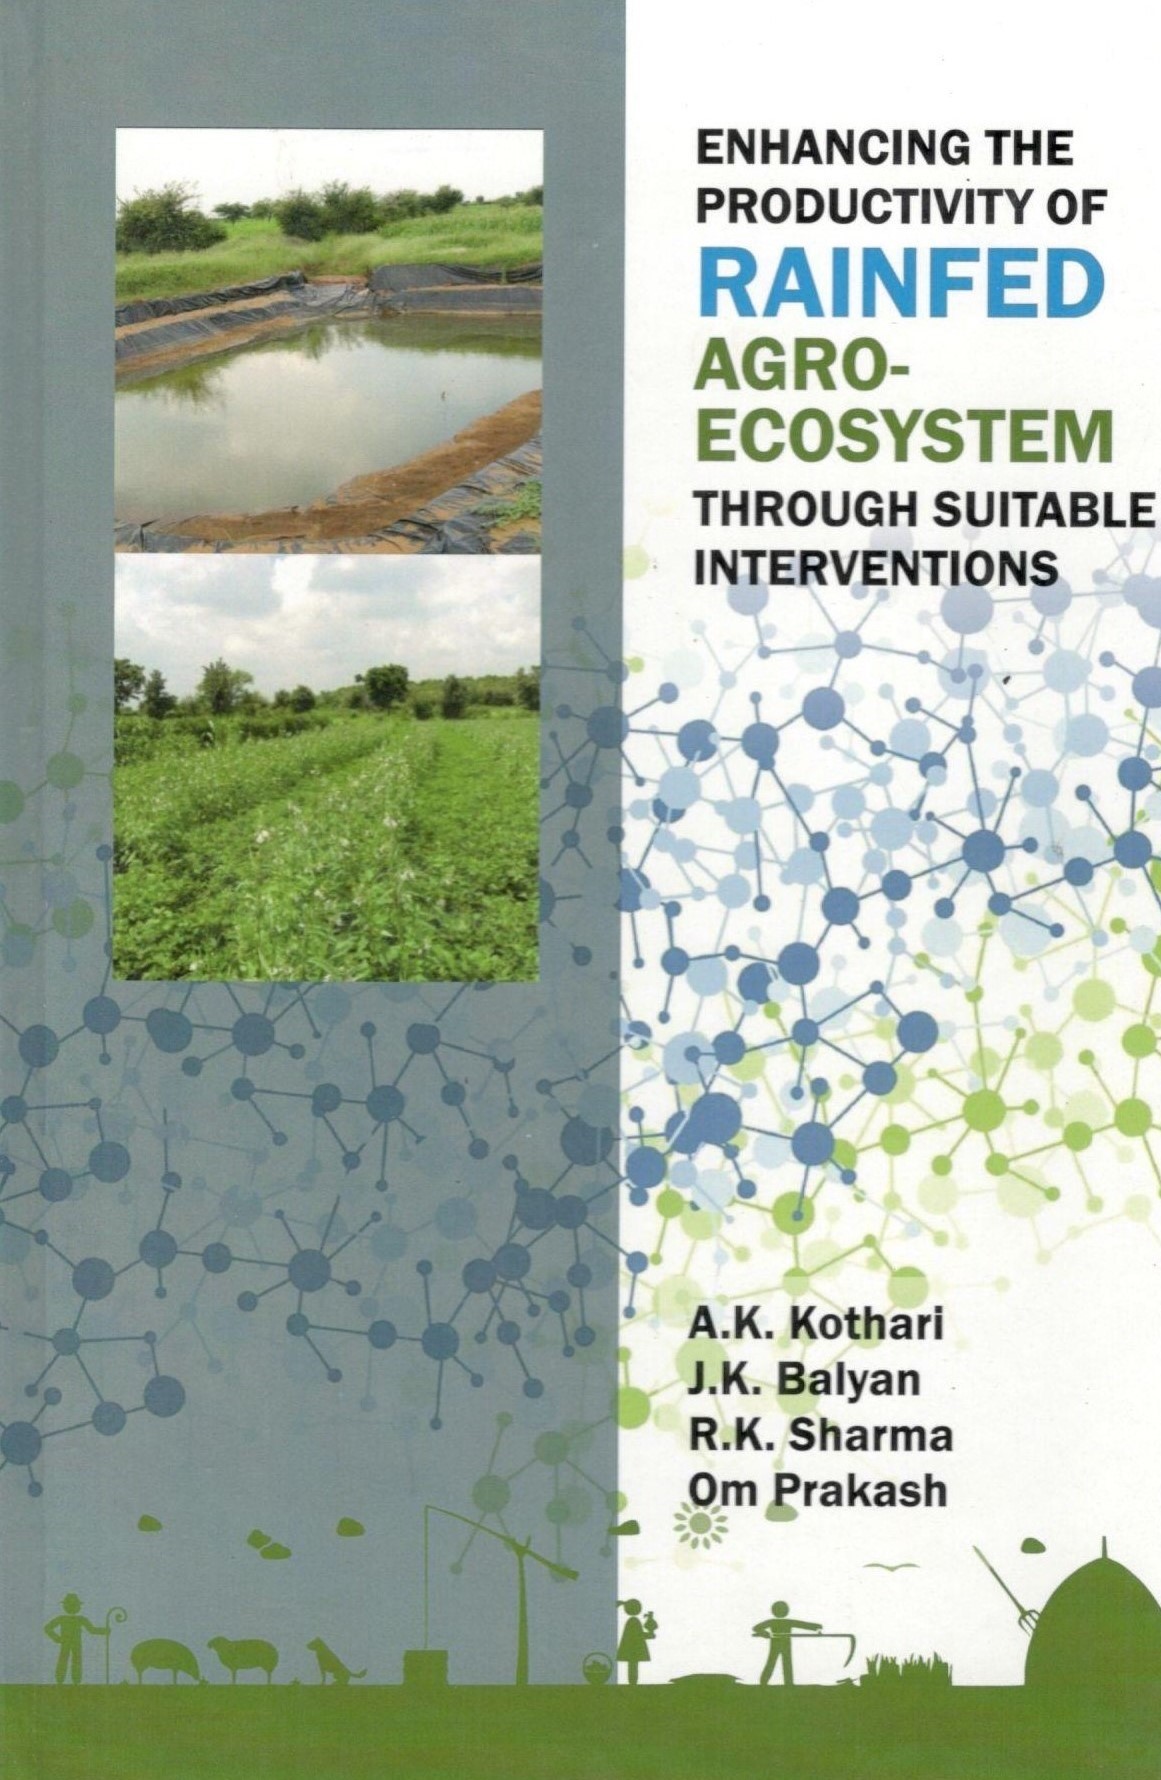 Enhancing The Productivity Of Rainfed Agro-Ecosystems Through Suitable Interventions